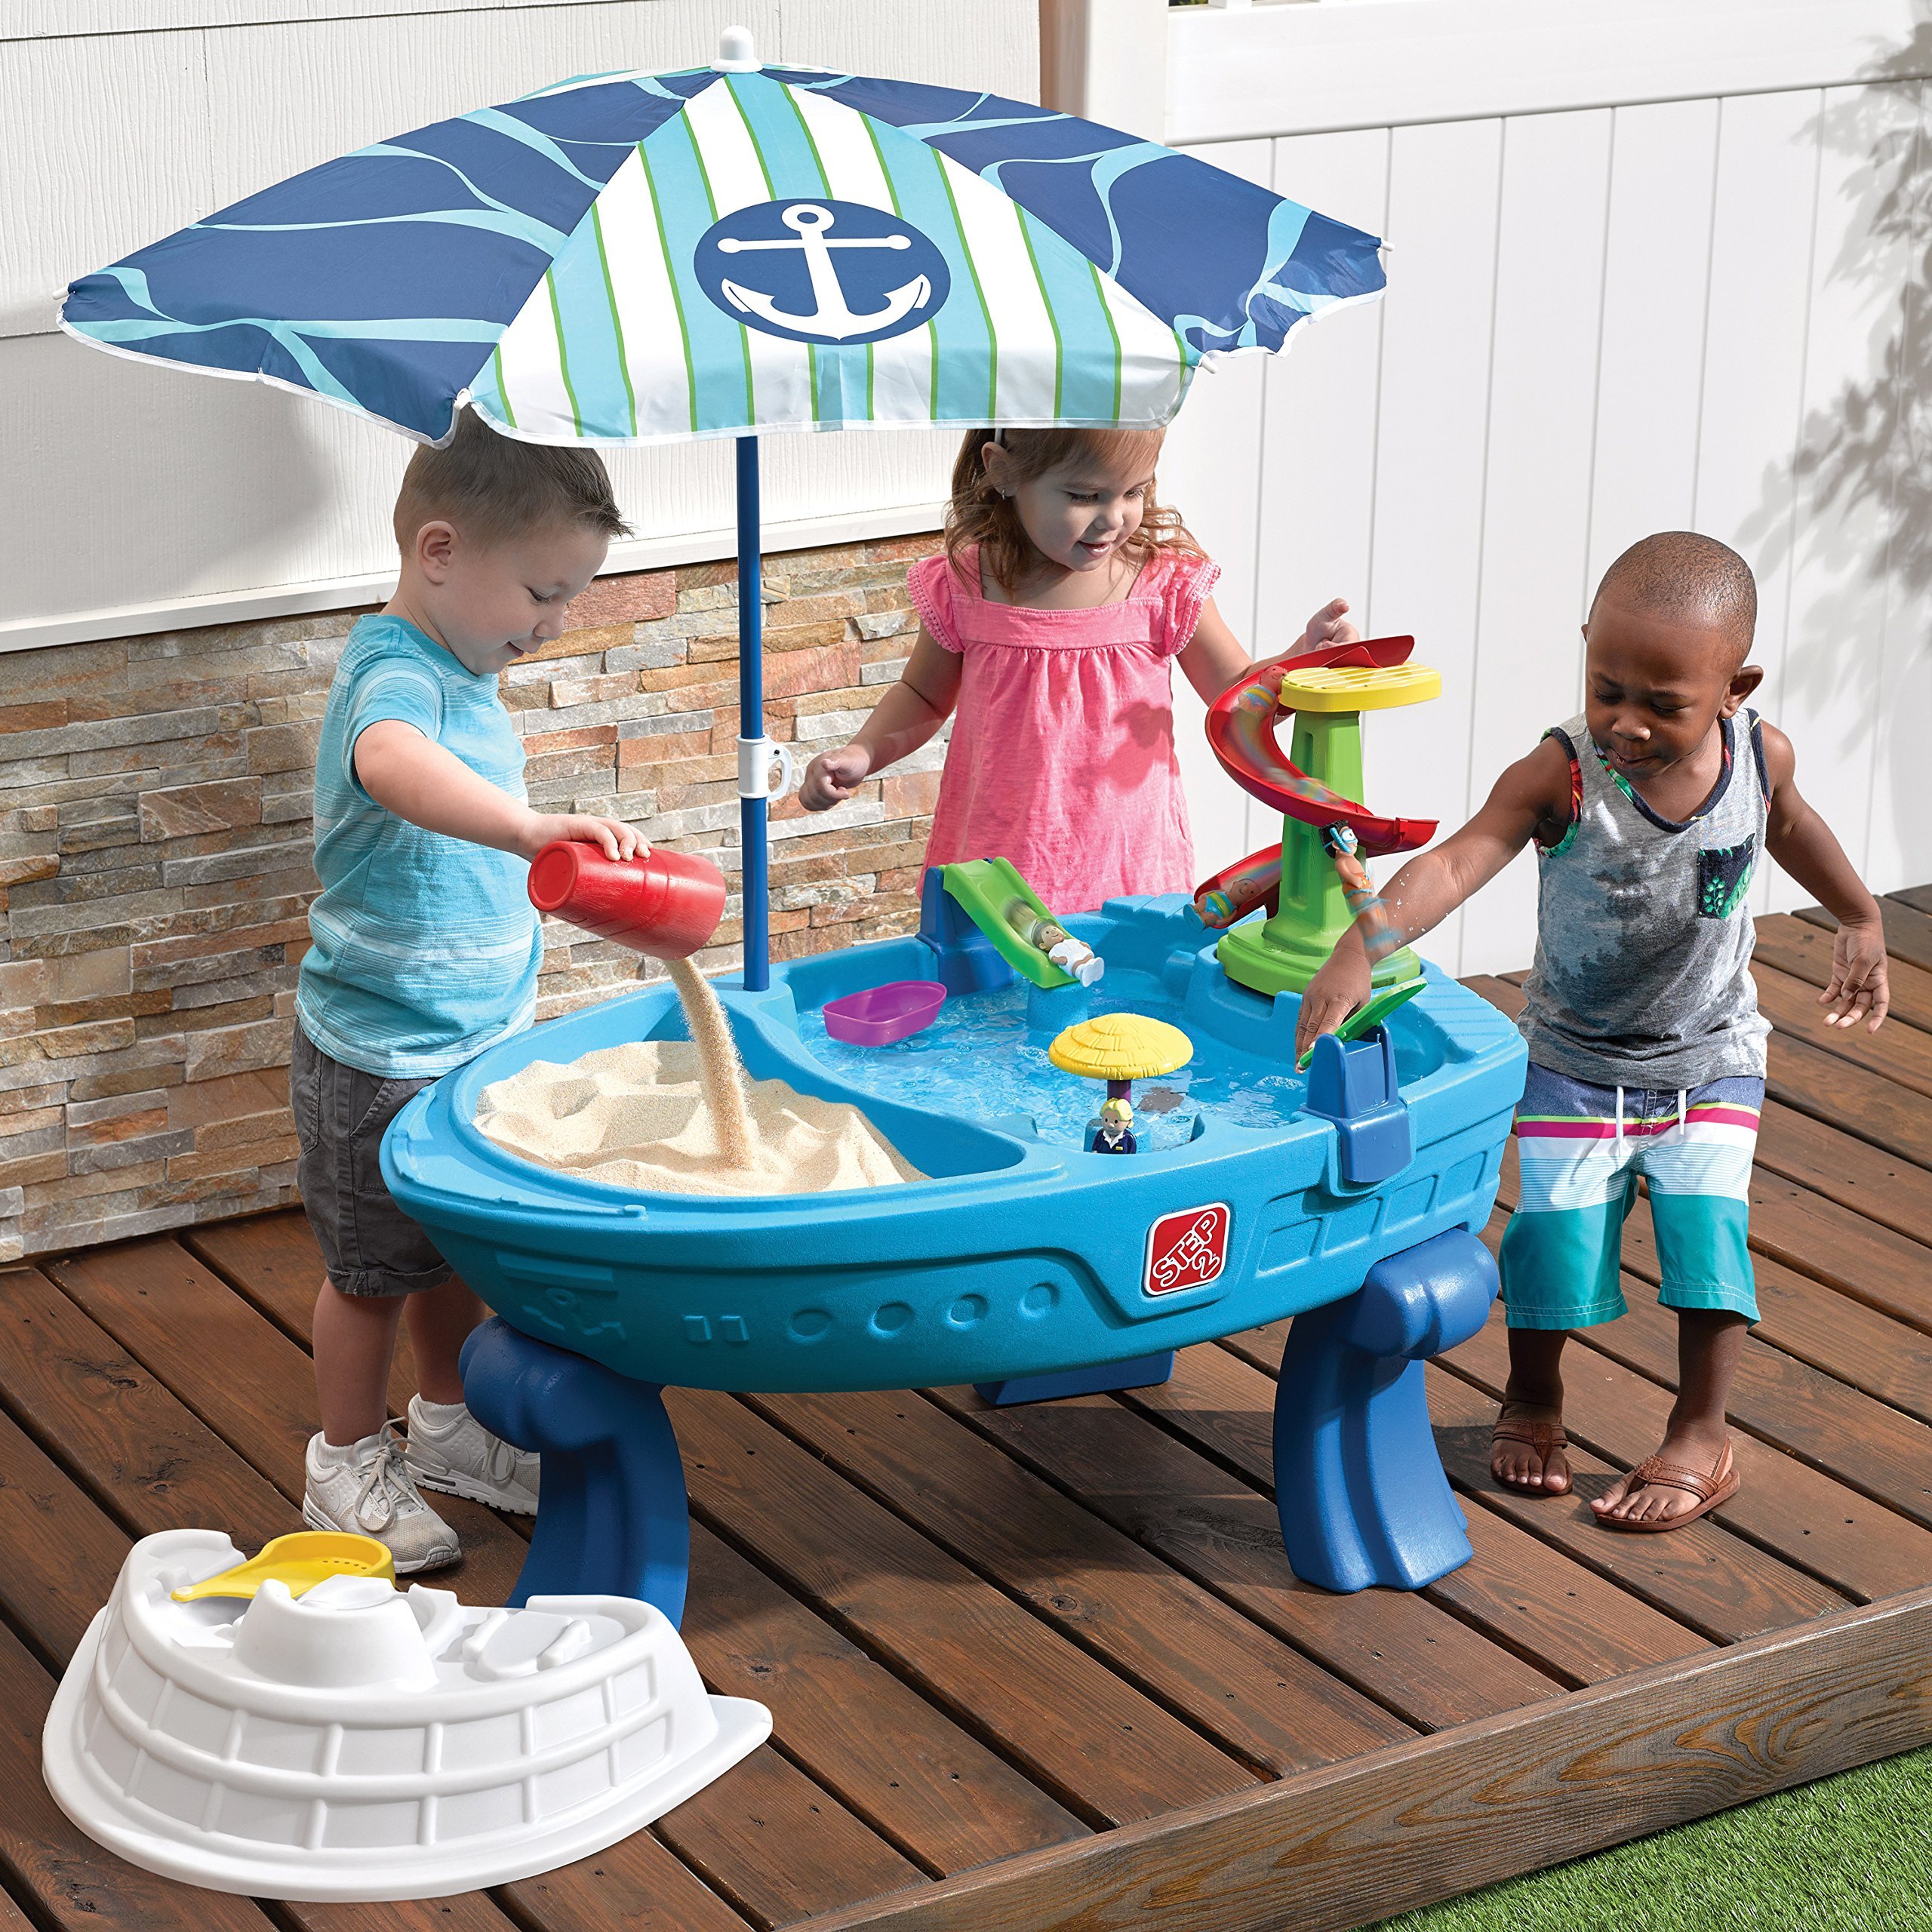 Step2 Fiesta Cruise Sand & Water Play Table with Umbrella - image 3 of 5